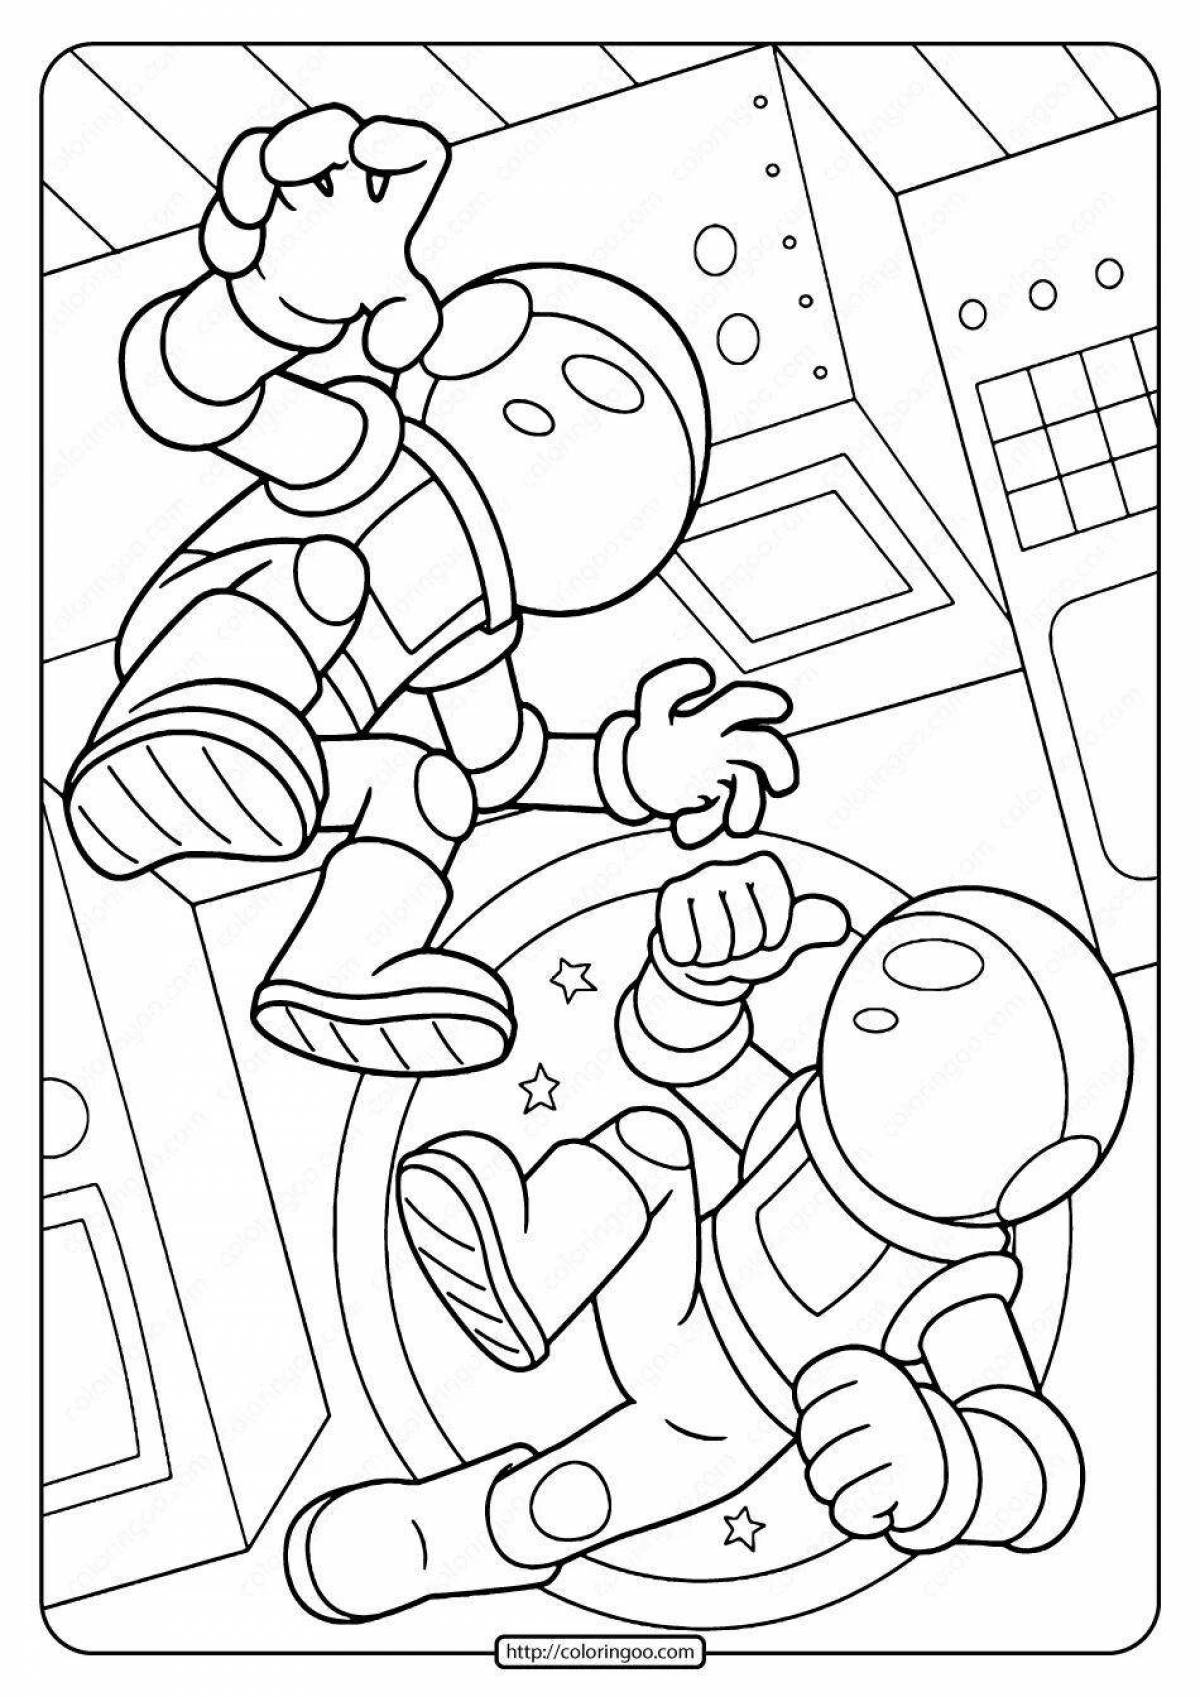 Space coloring book